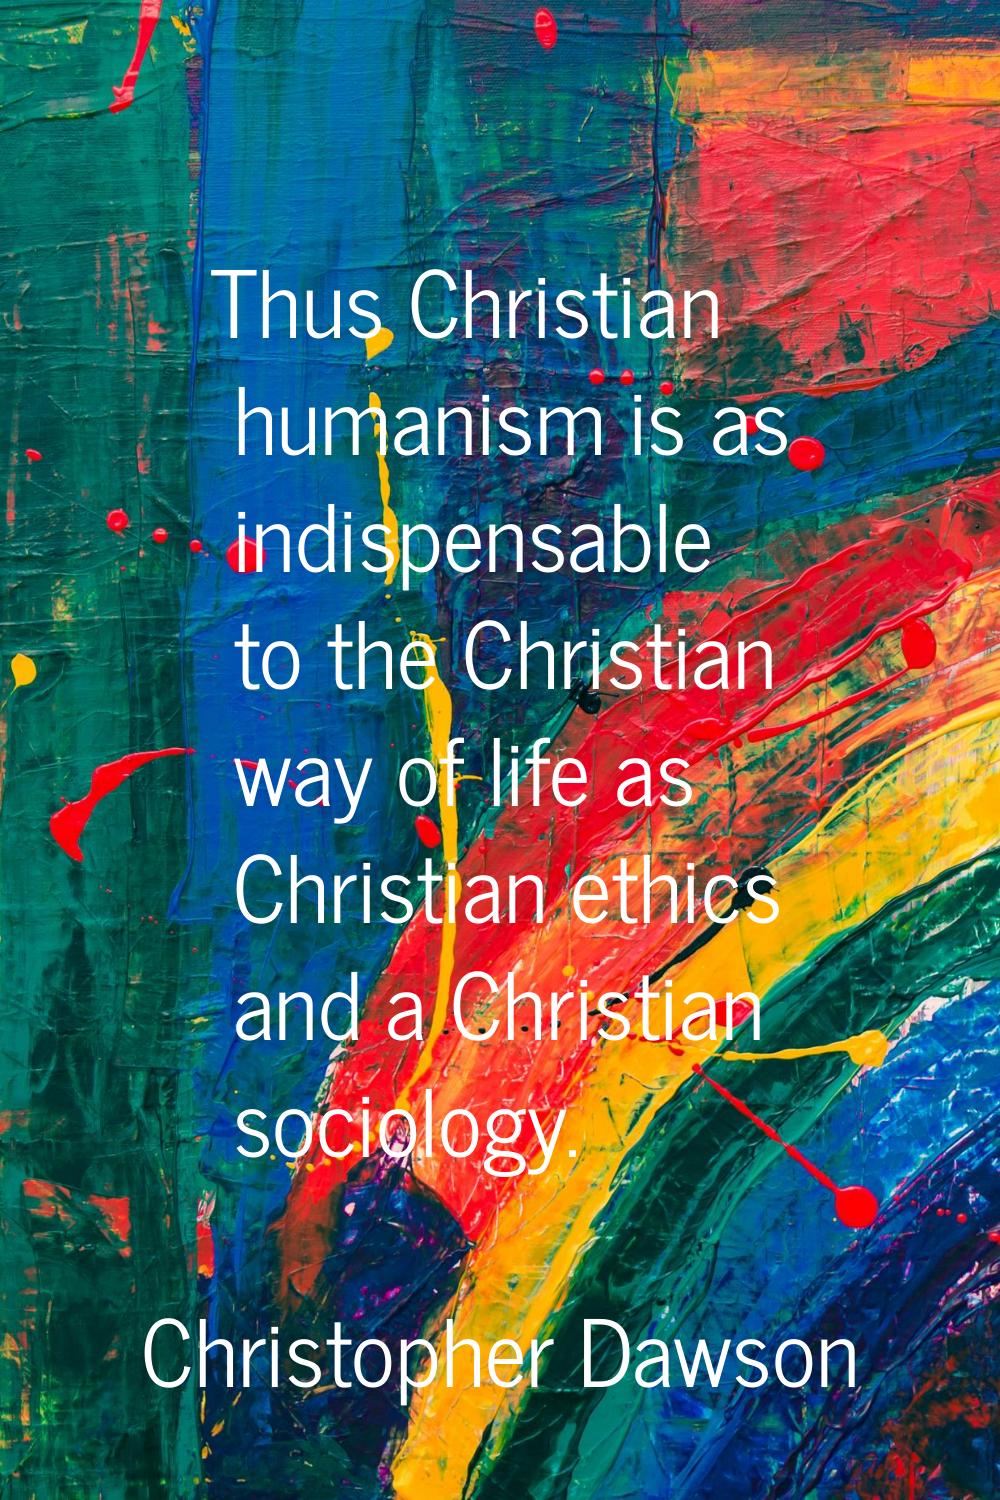 Thus Christian humanism is as indispensable to the Christian way of life as Christian ethics and a 